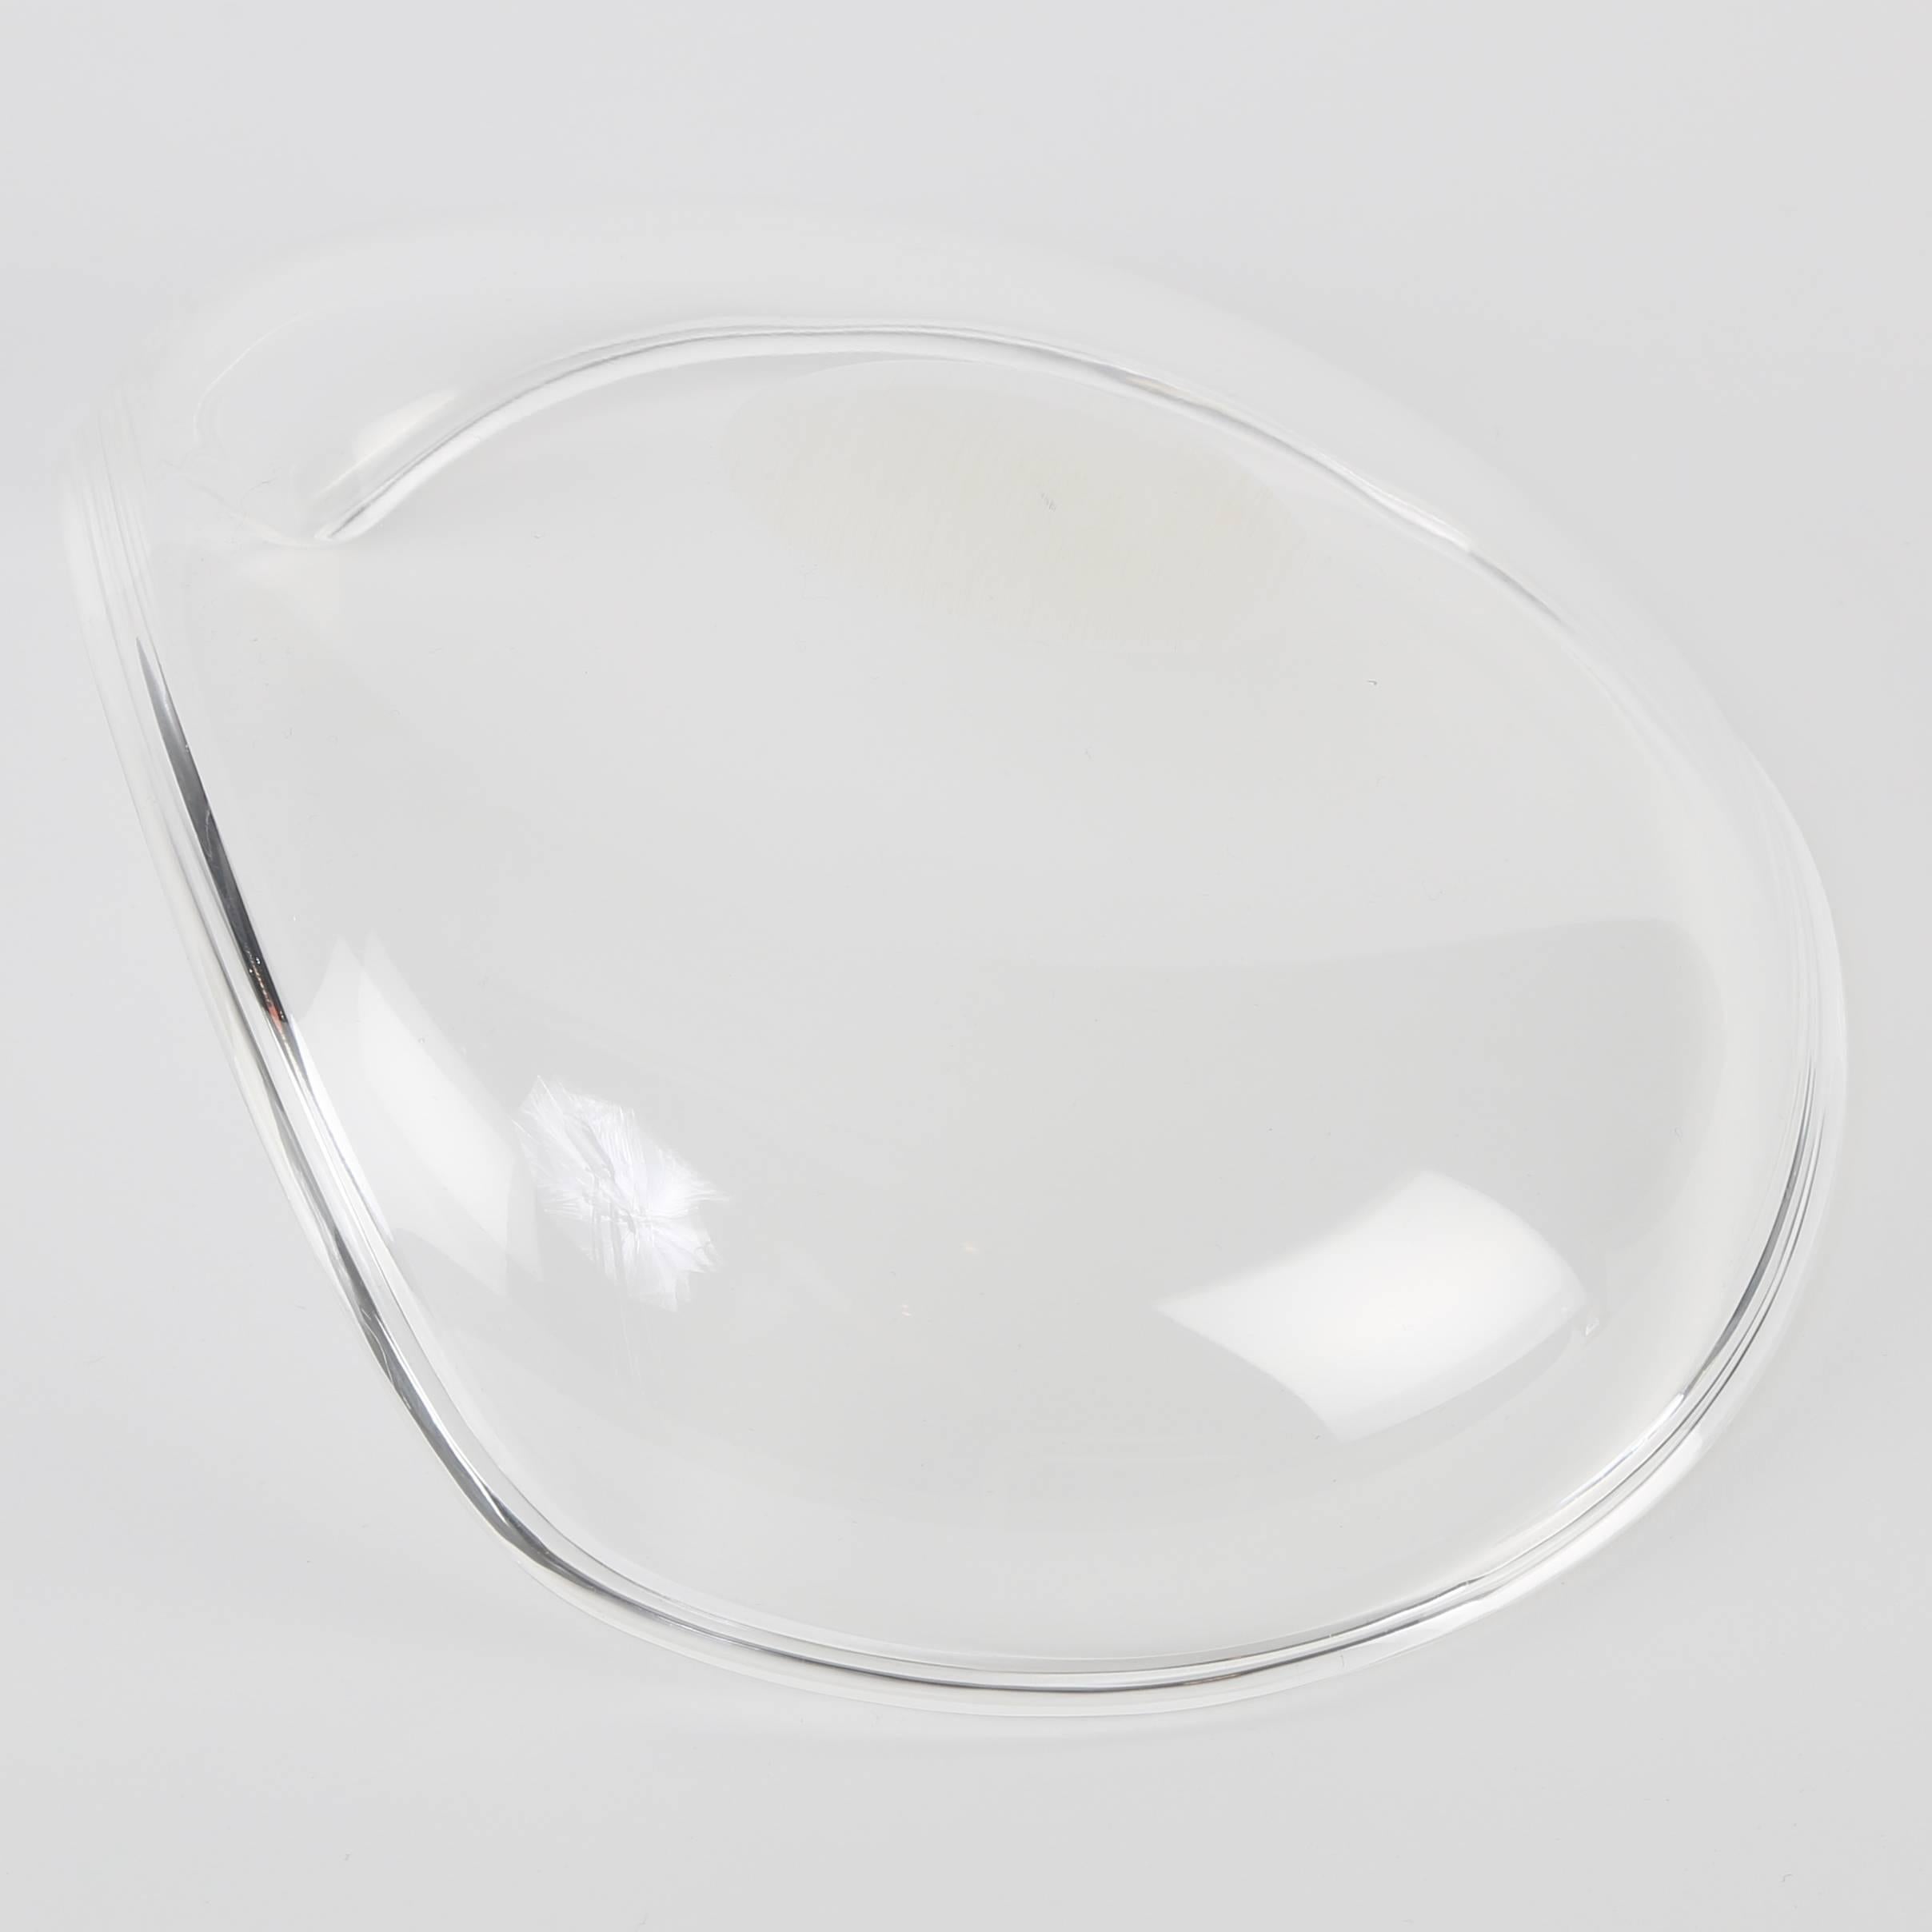 Collection of Three Lucite Centerpiece Bowls, Circa 1970s For Sale 3